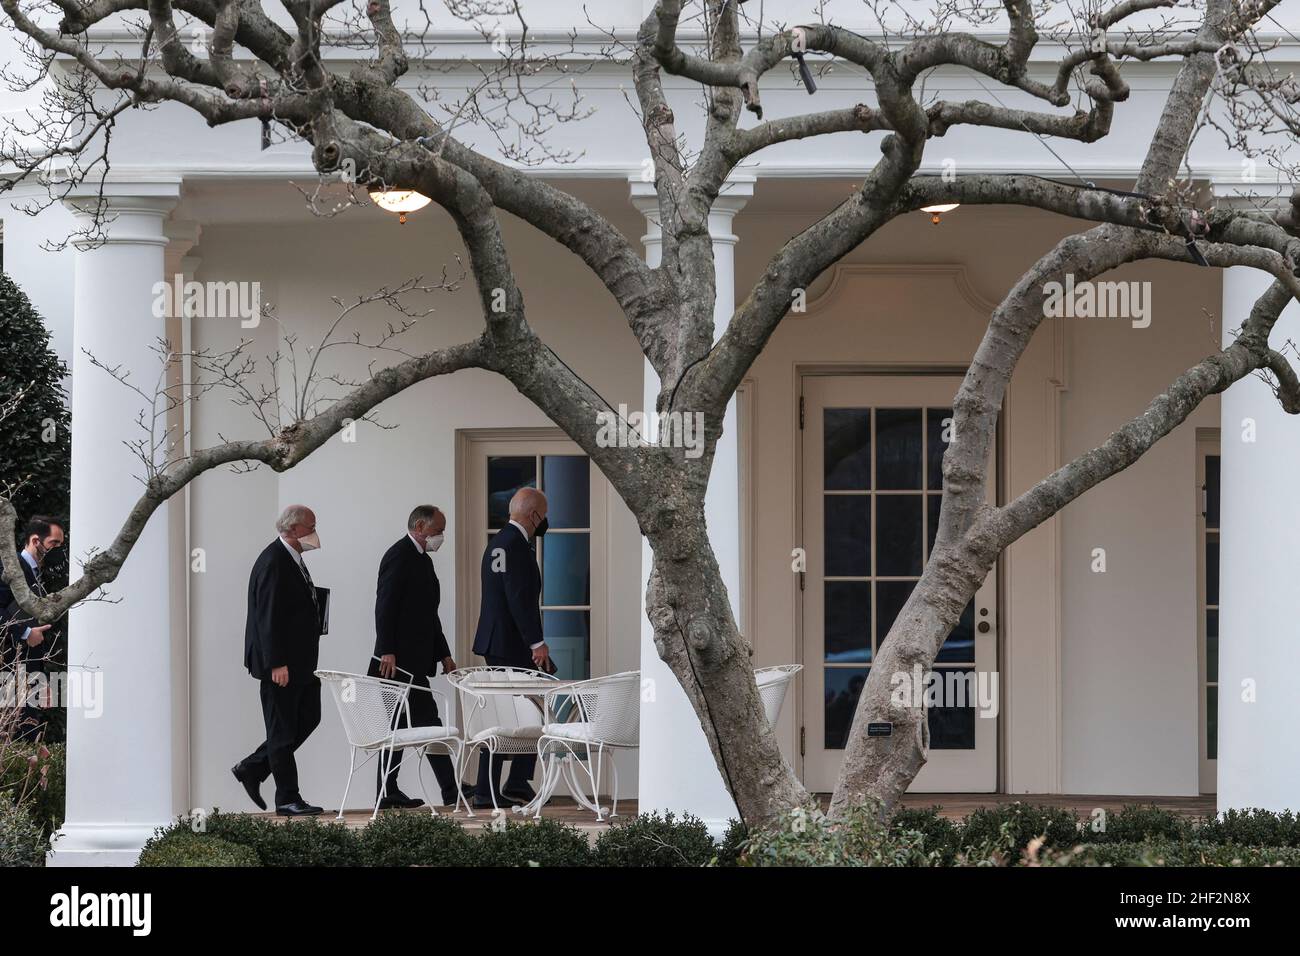 Washington, USA. 13th Jan, 2021. President Joe Biden walks with advisers Steve Ricchetti and Mike Donilon as he returns to the Oval Office of the White House after meeting with Senate Democrats at the US Capitol in Washington, DC on January 13, 2022. (Photo by Oliver Contreras/Sipa USA) Credit: Sipa USA/Alamy Live News Stock Photo